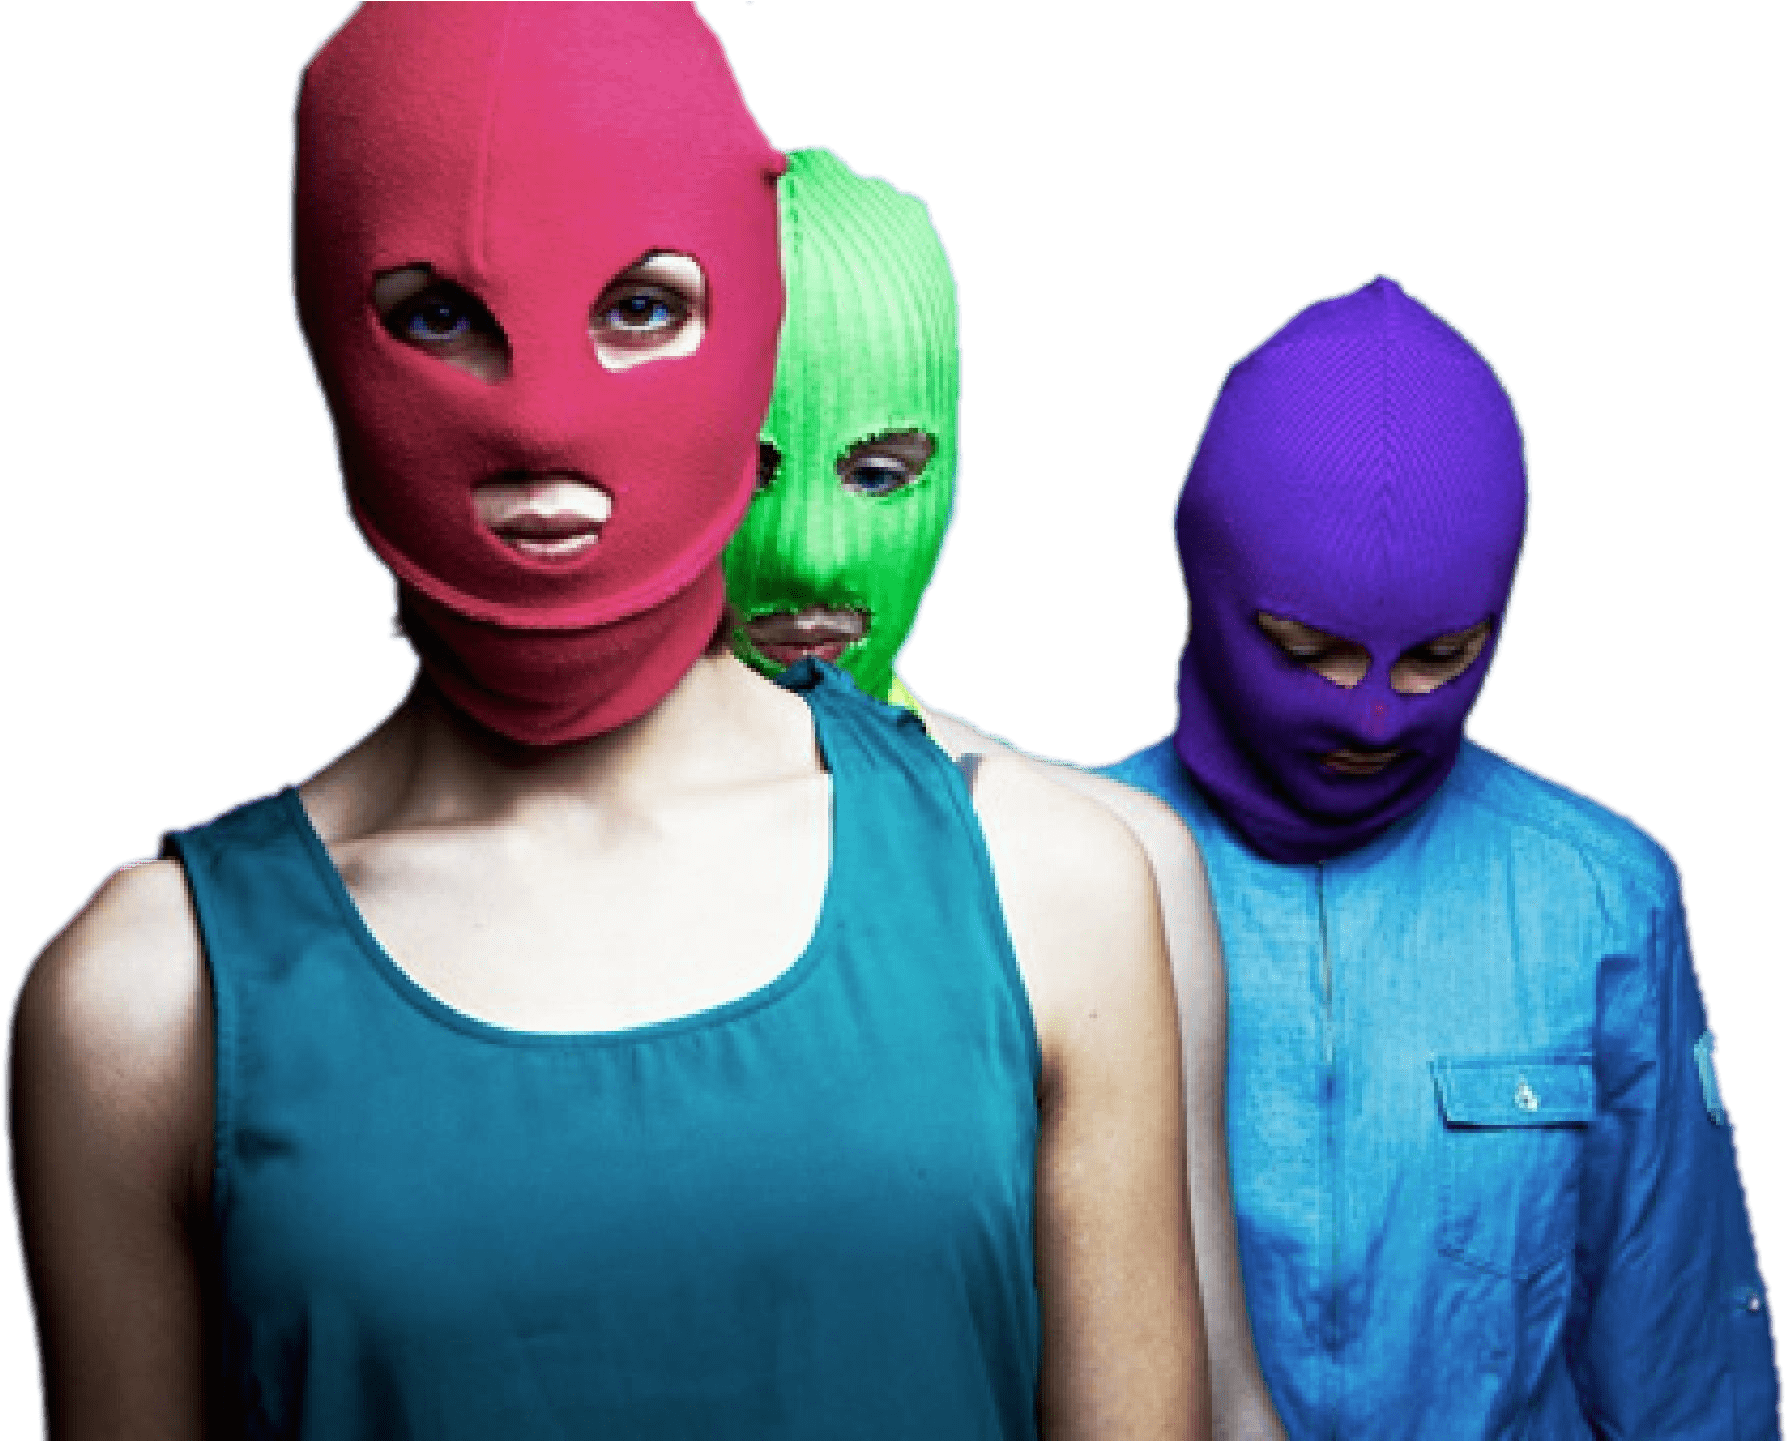 A Group Of People Wearing Masks